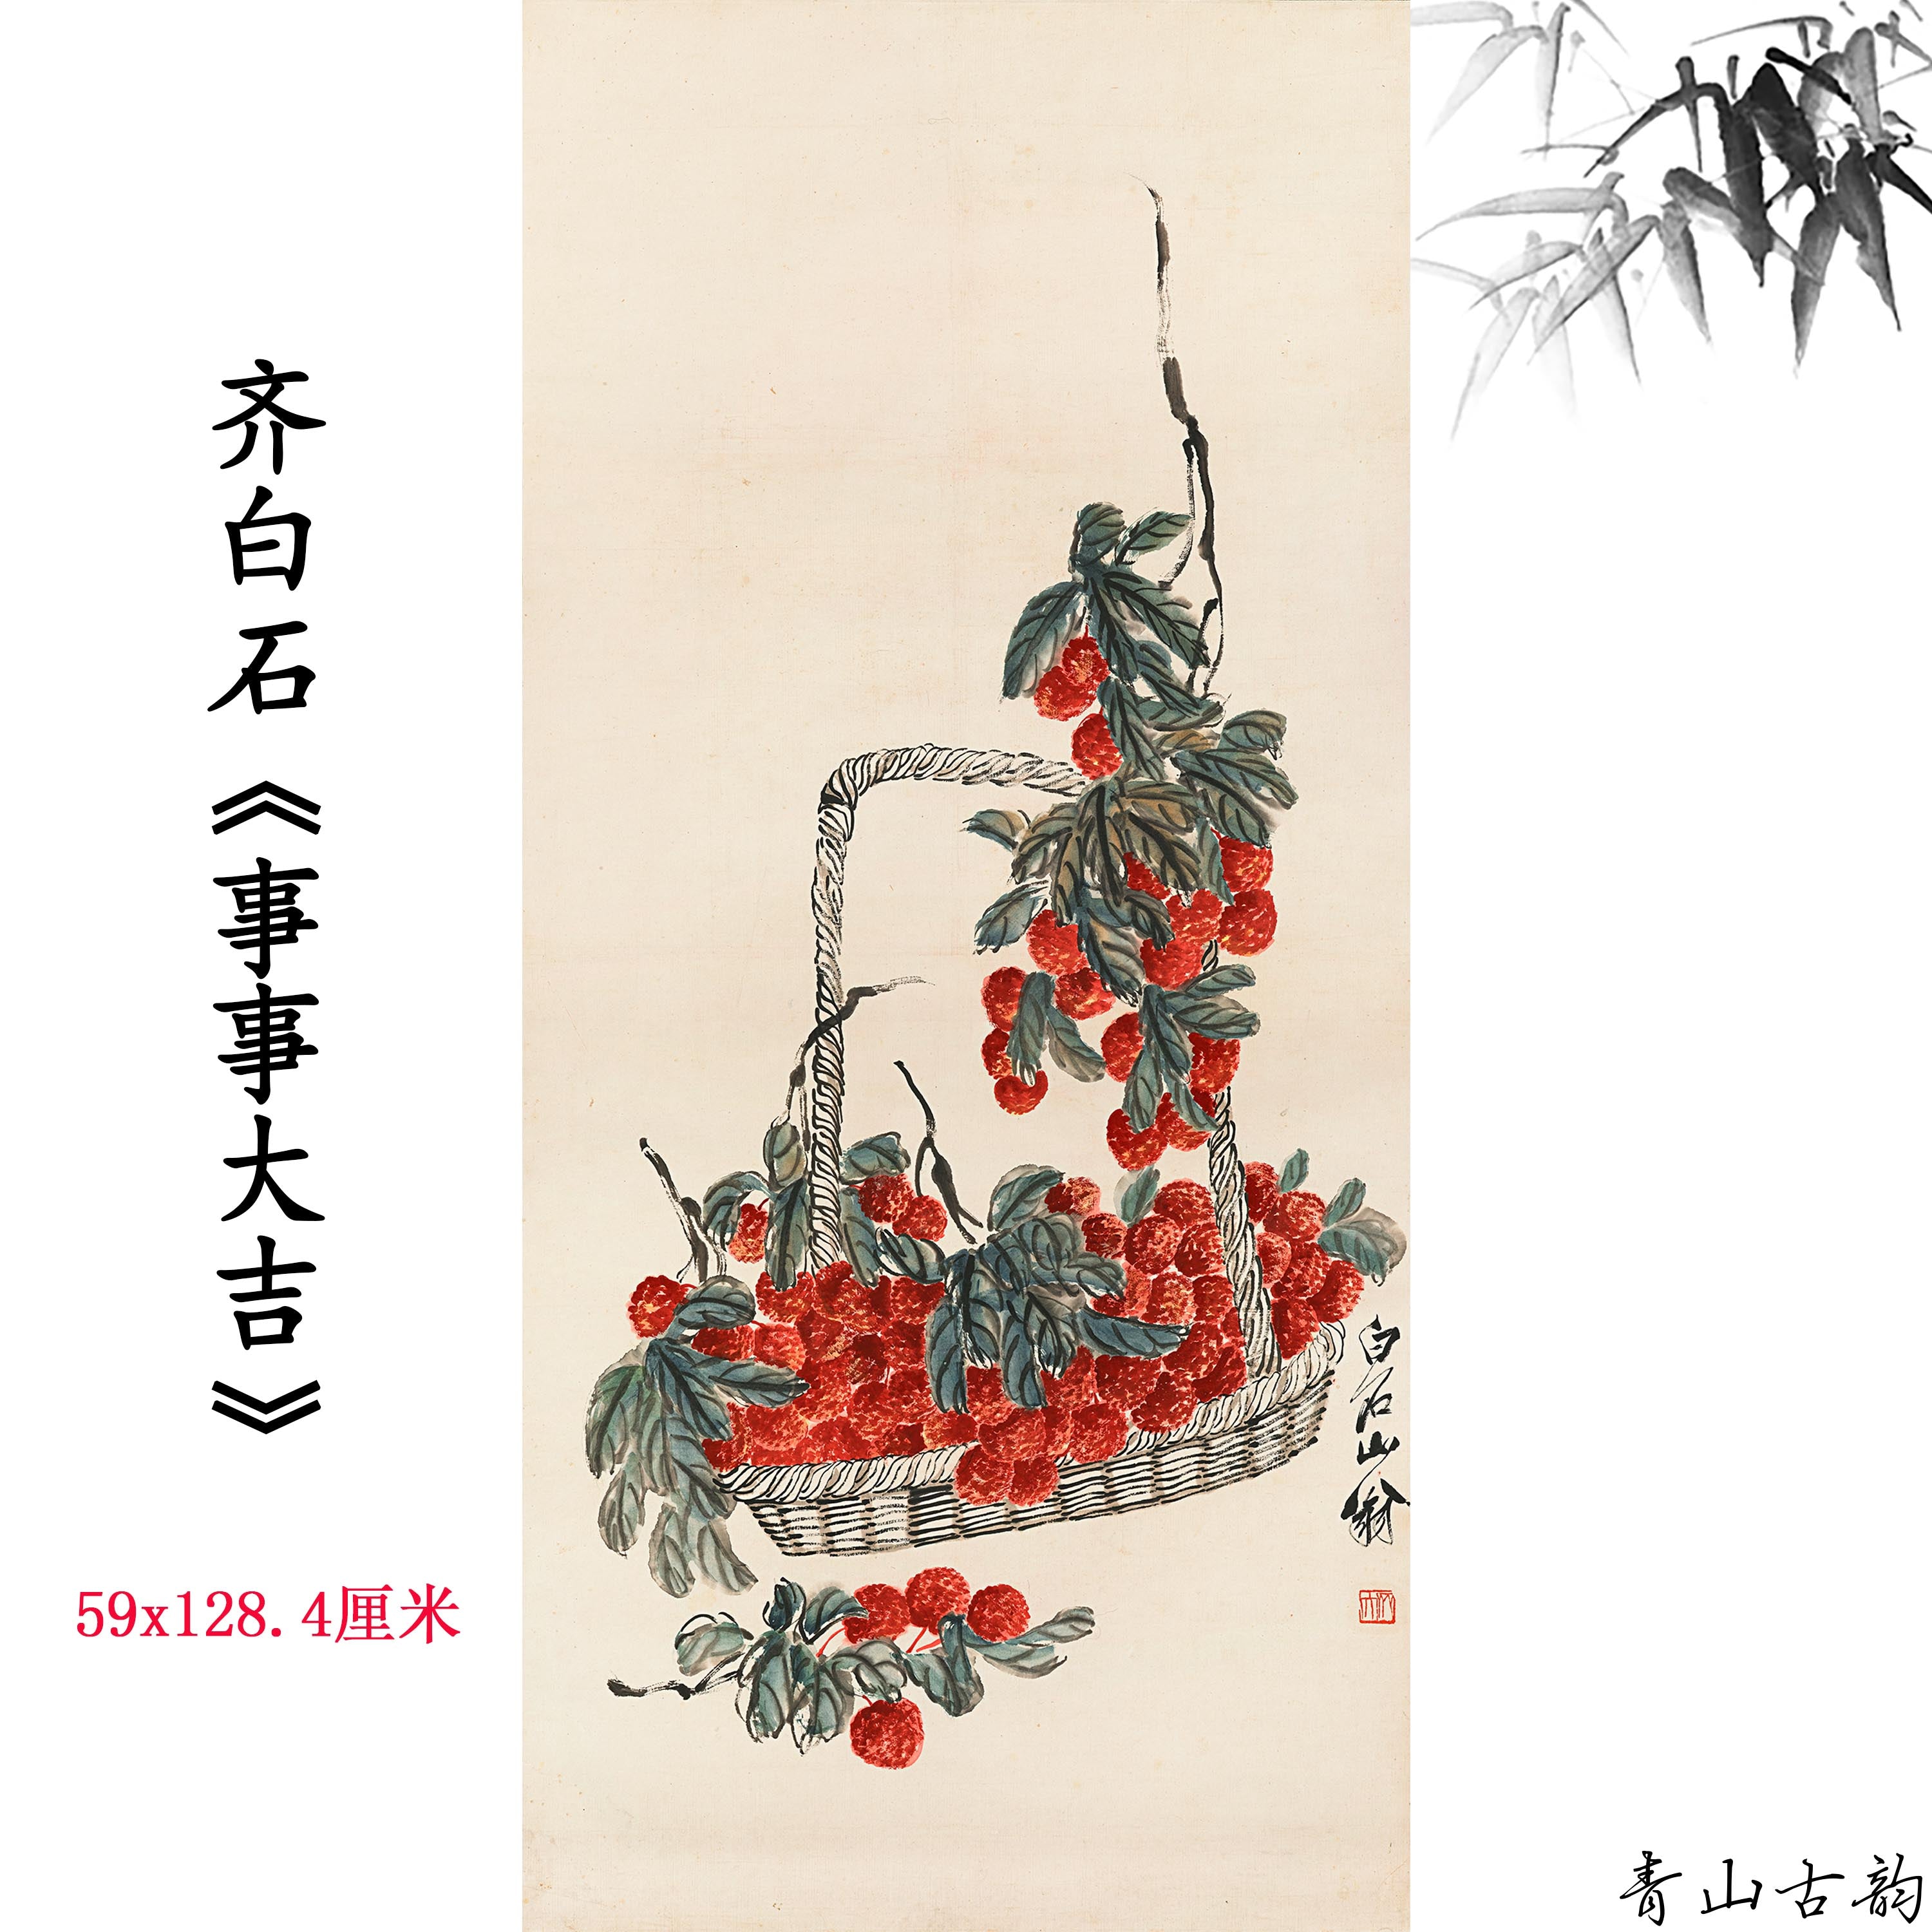 Chinese Antique Art Painting Qi Baishi, everything is going well, litchi 齐白石 事事大吉